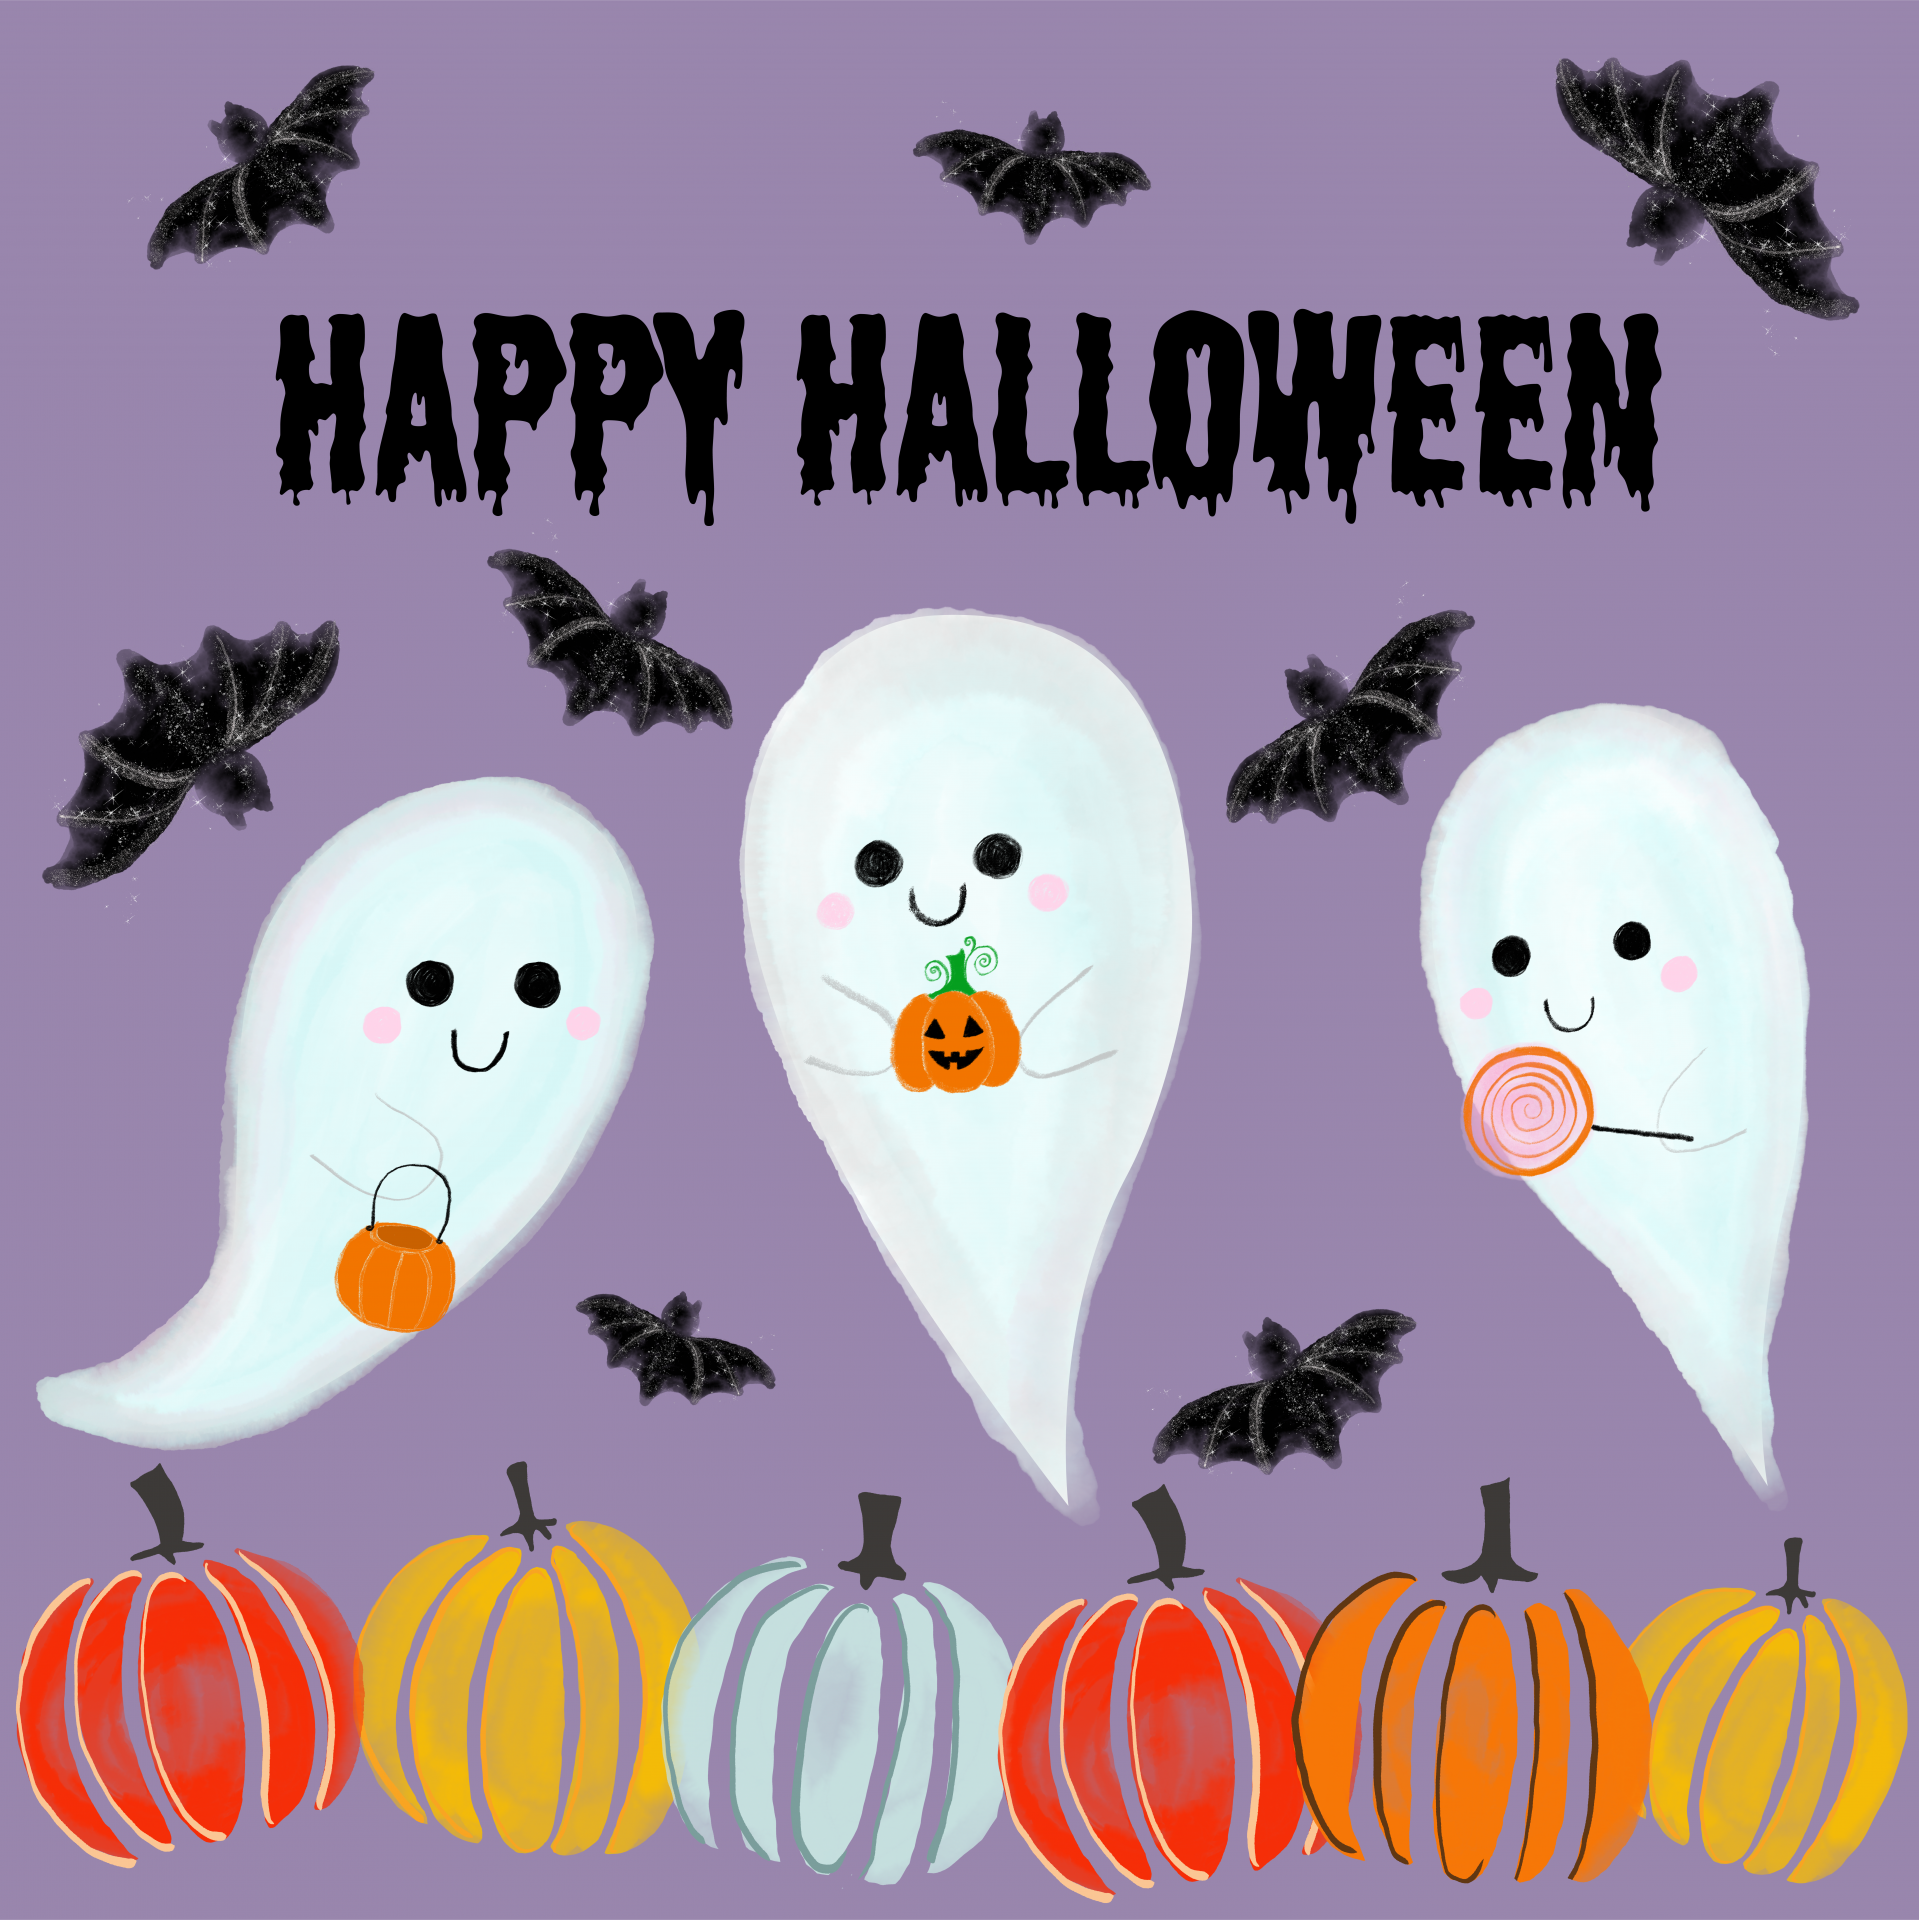 Happy Halloween card illustration with ghosts, pumpkins and bats